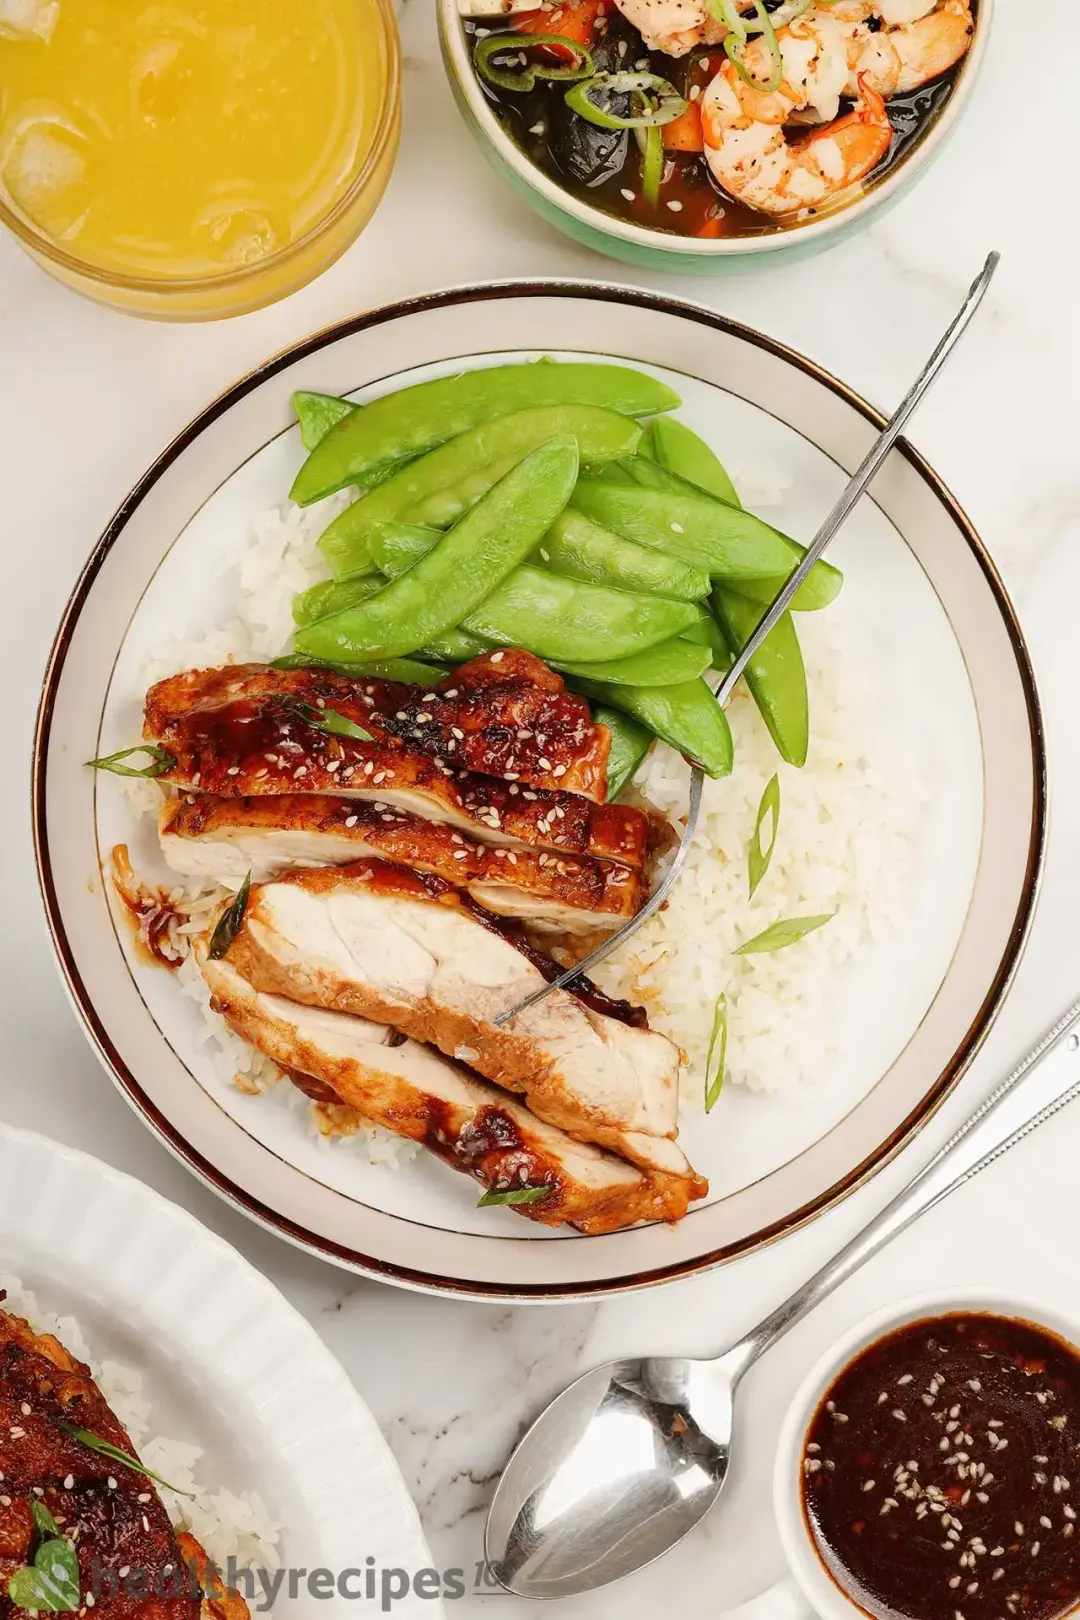 What to Eat With Teriyaki Chicken